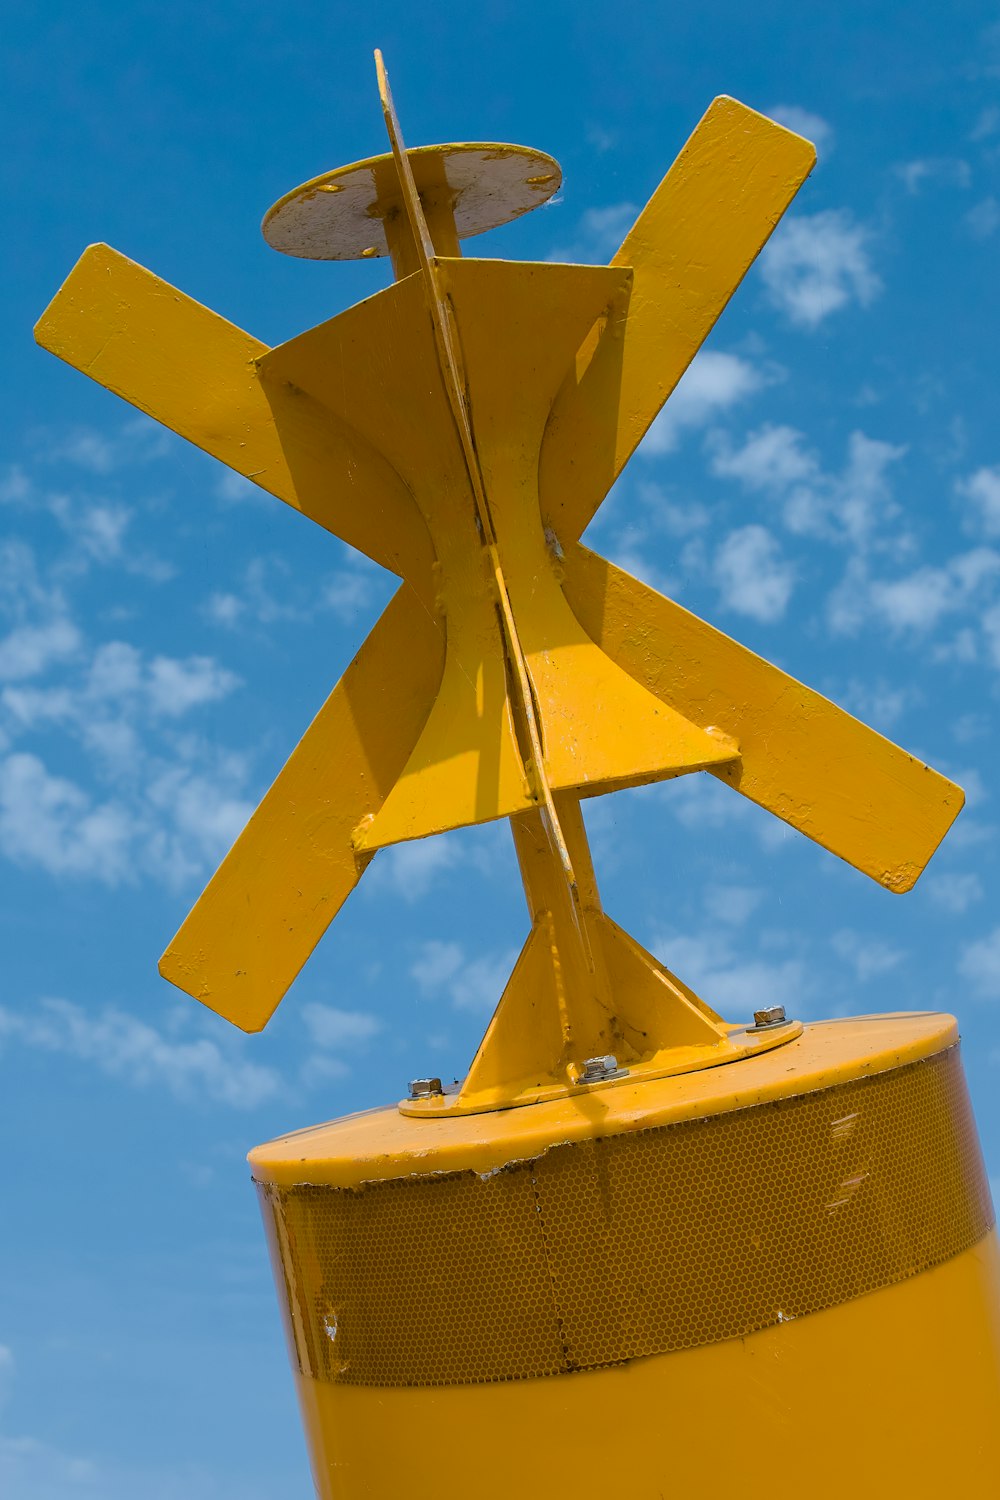 yellow and brown windmill under blue sky during daytime